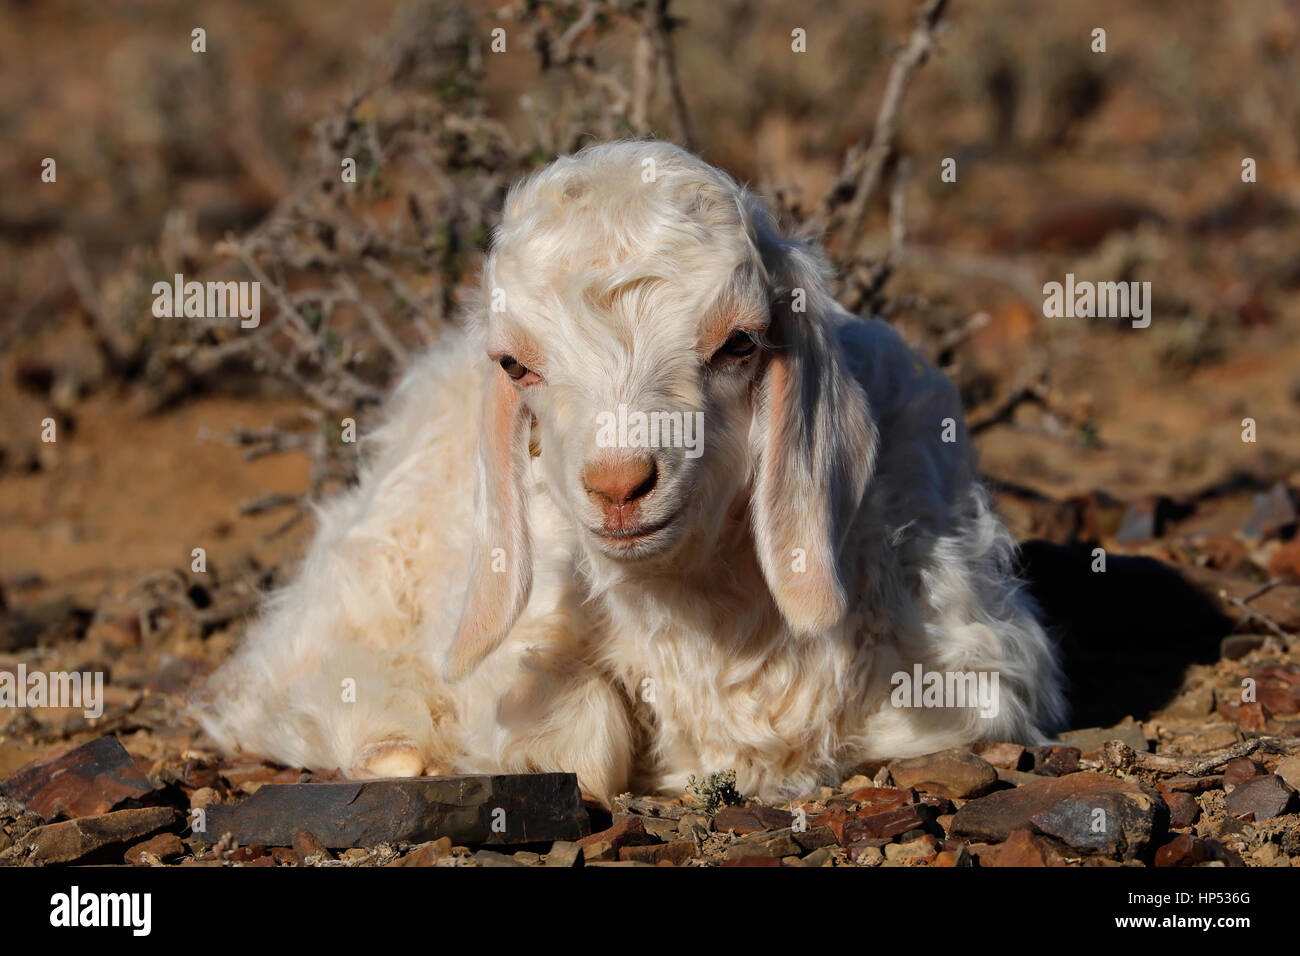 A young angora goat kid on a rural farm Stock Photo